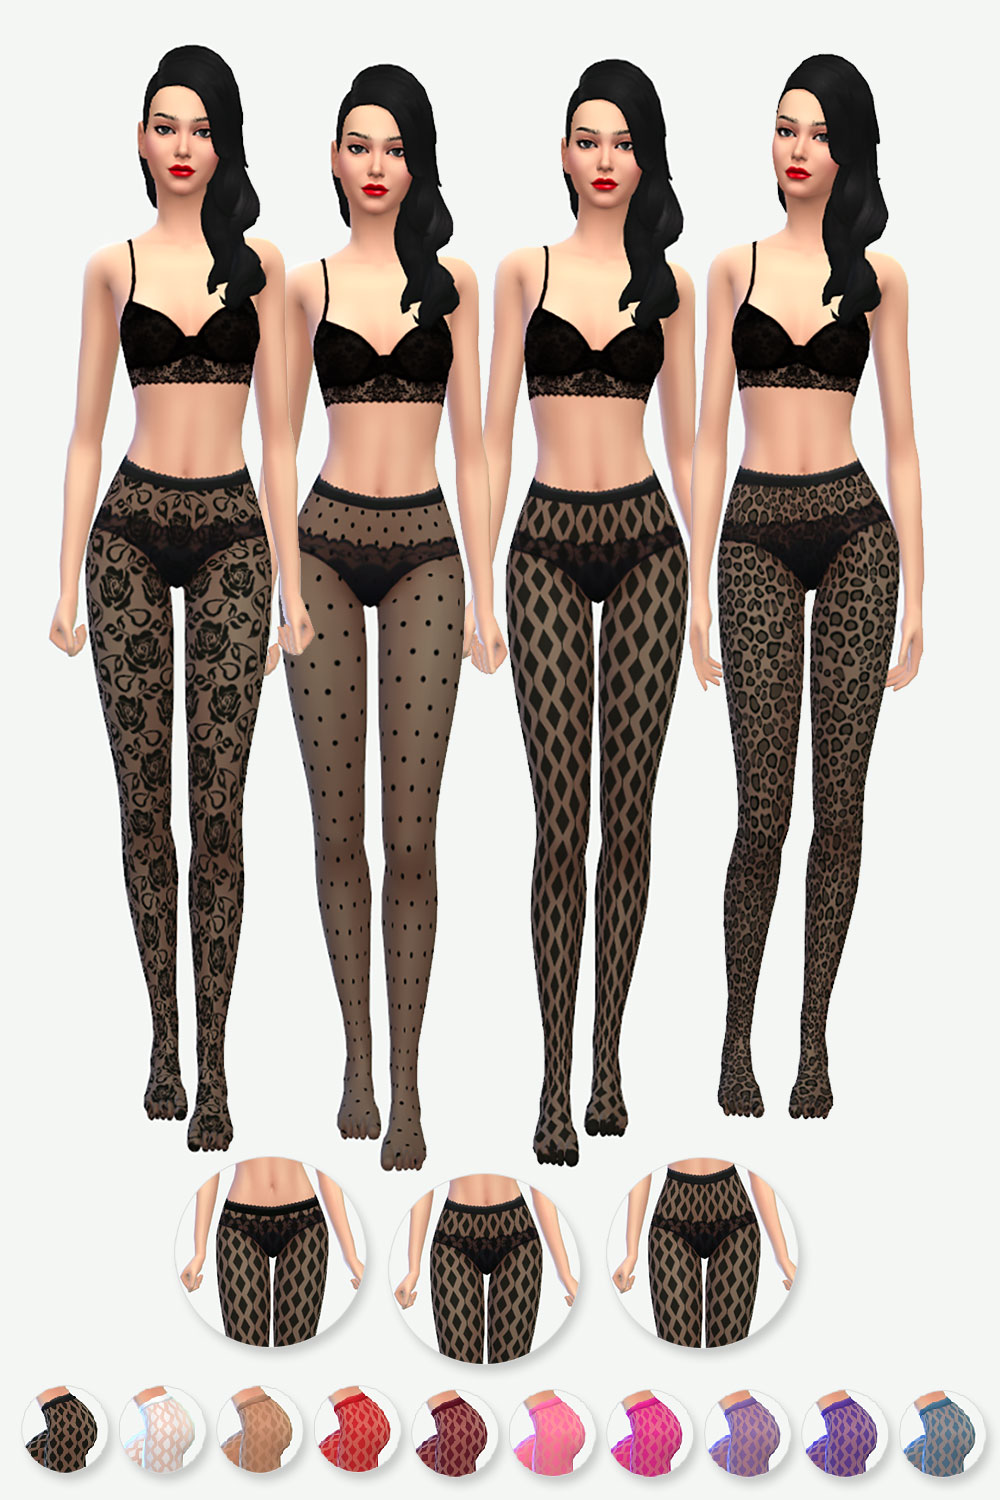 The Sims 4 Pattern Tights